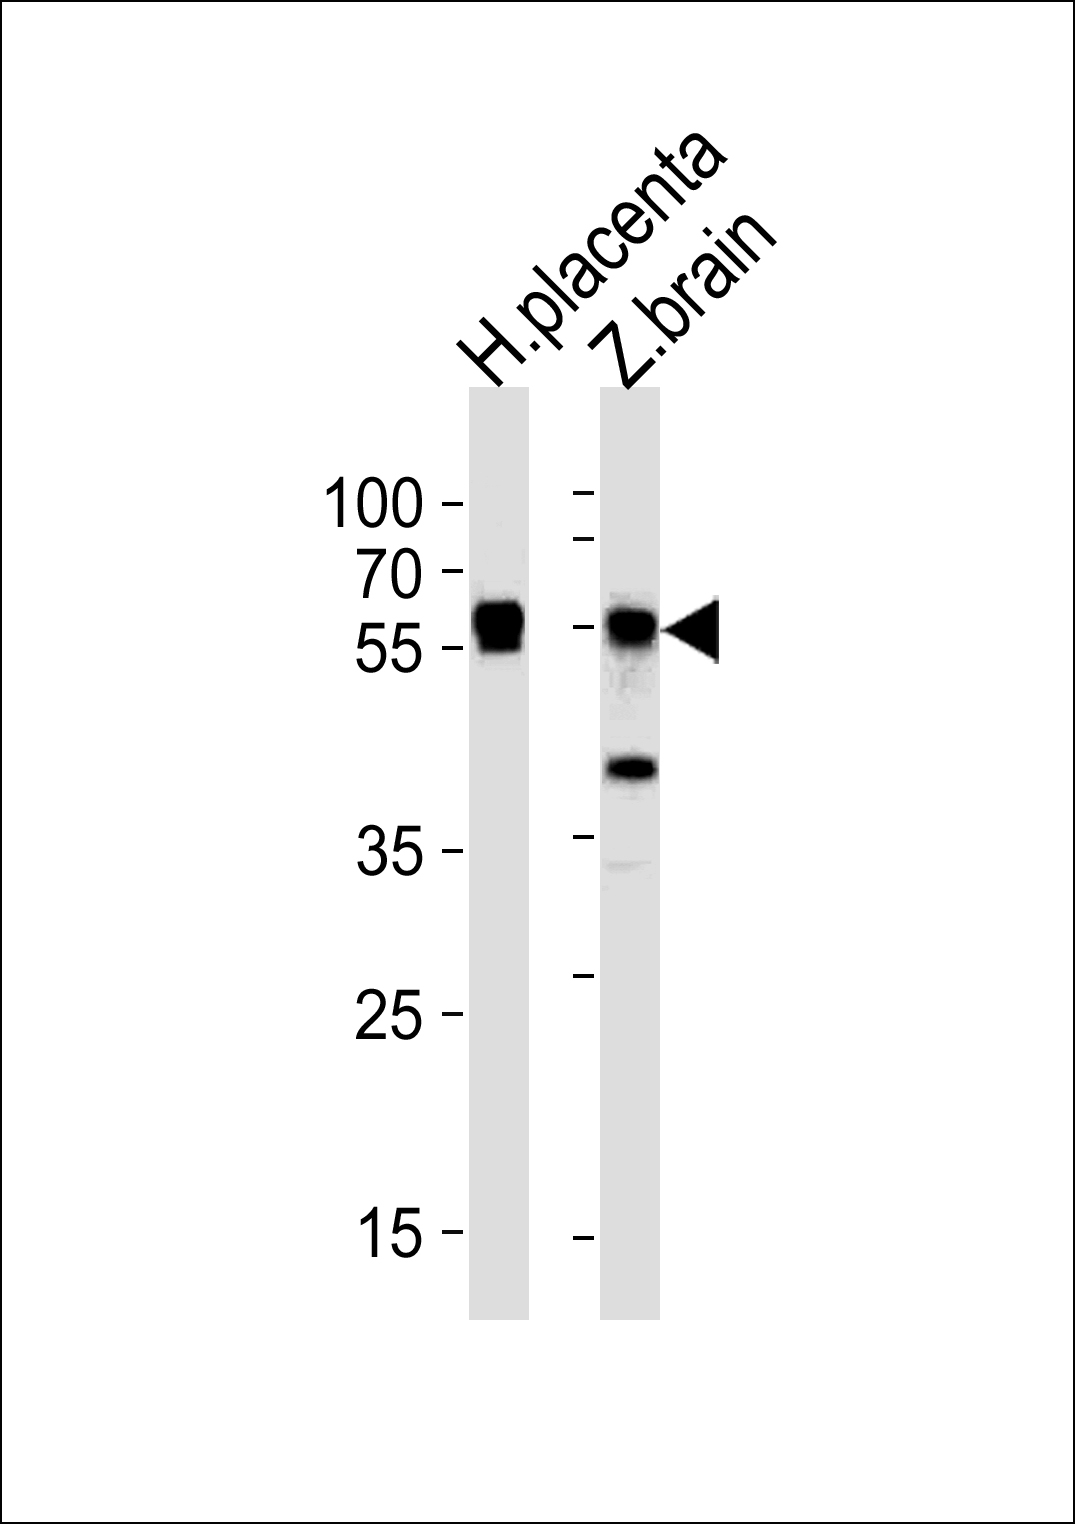 Western blot analysis of lysates from huaman placenta and zebra fish brain tissue (from left to right),using Zebrafishstk3(36kDa subunit) Antibody (Center)(Cat. #Azb10042a).Azb10042a was diluted at 1:1000 at each lane. A goat anti-rabbit IgG H&L(HRP) at 1:5000 dilution was used as the secondary antibody.Lysates at 35ug per lane.